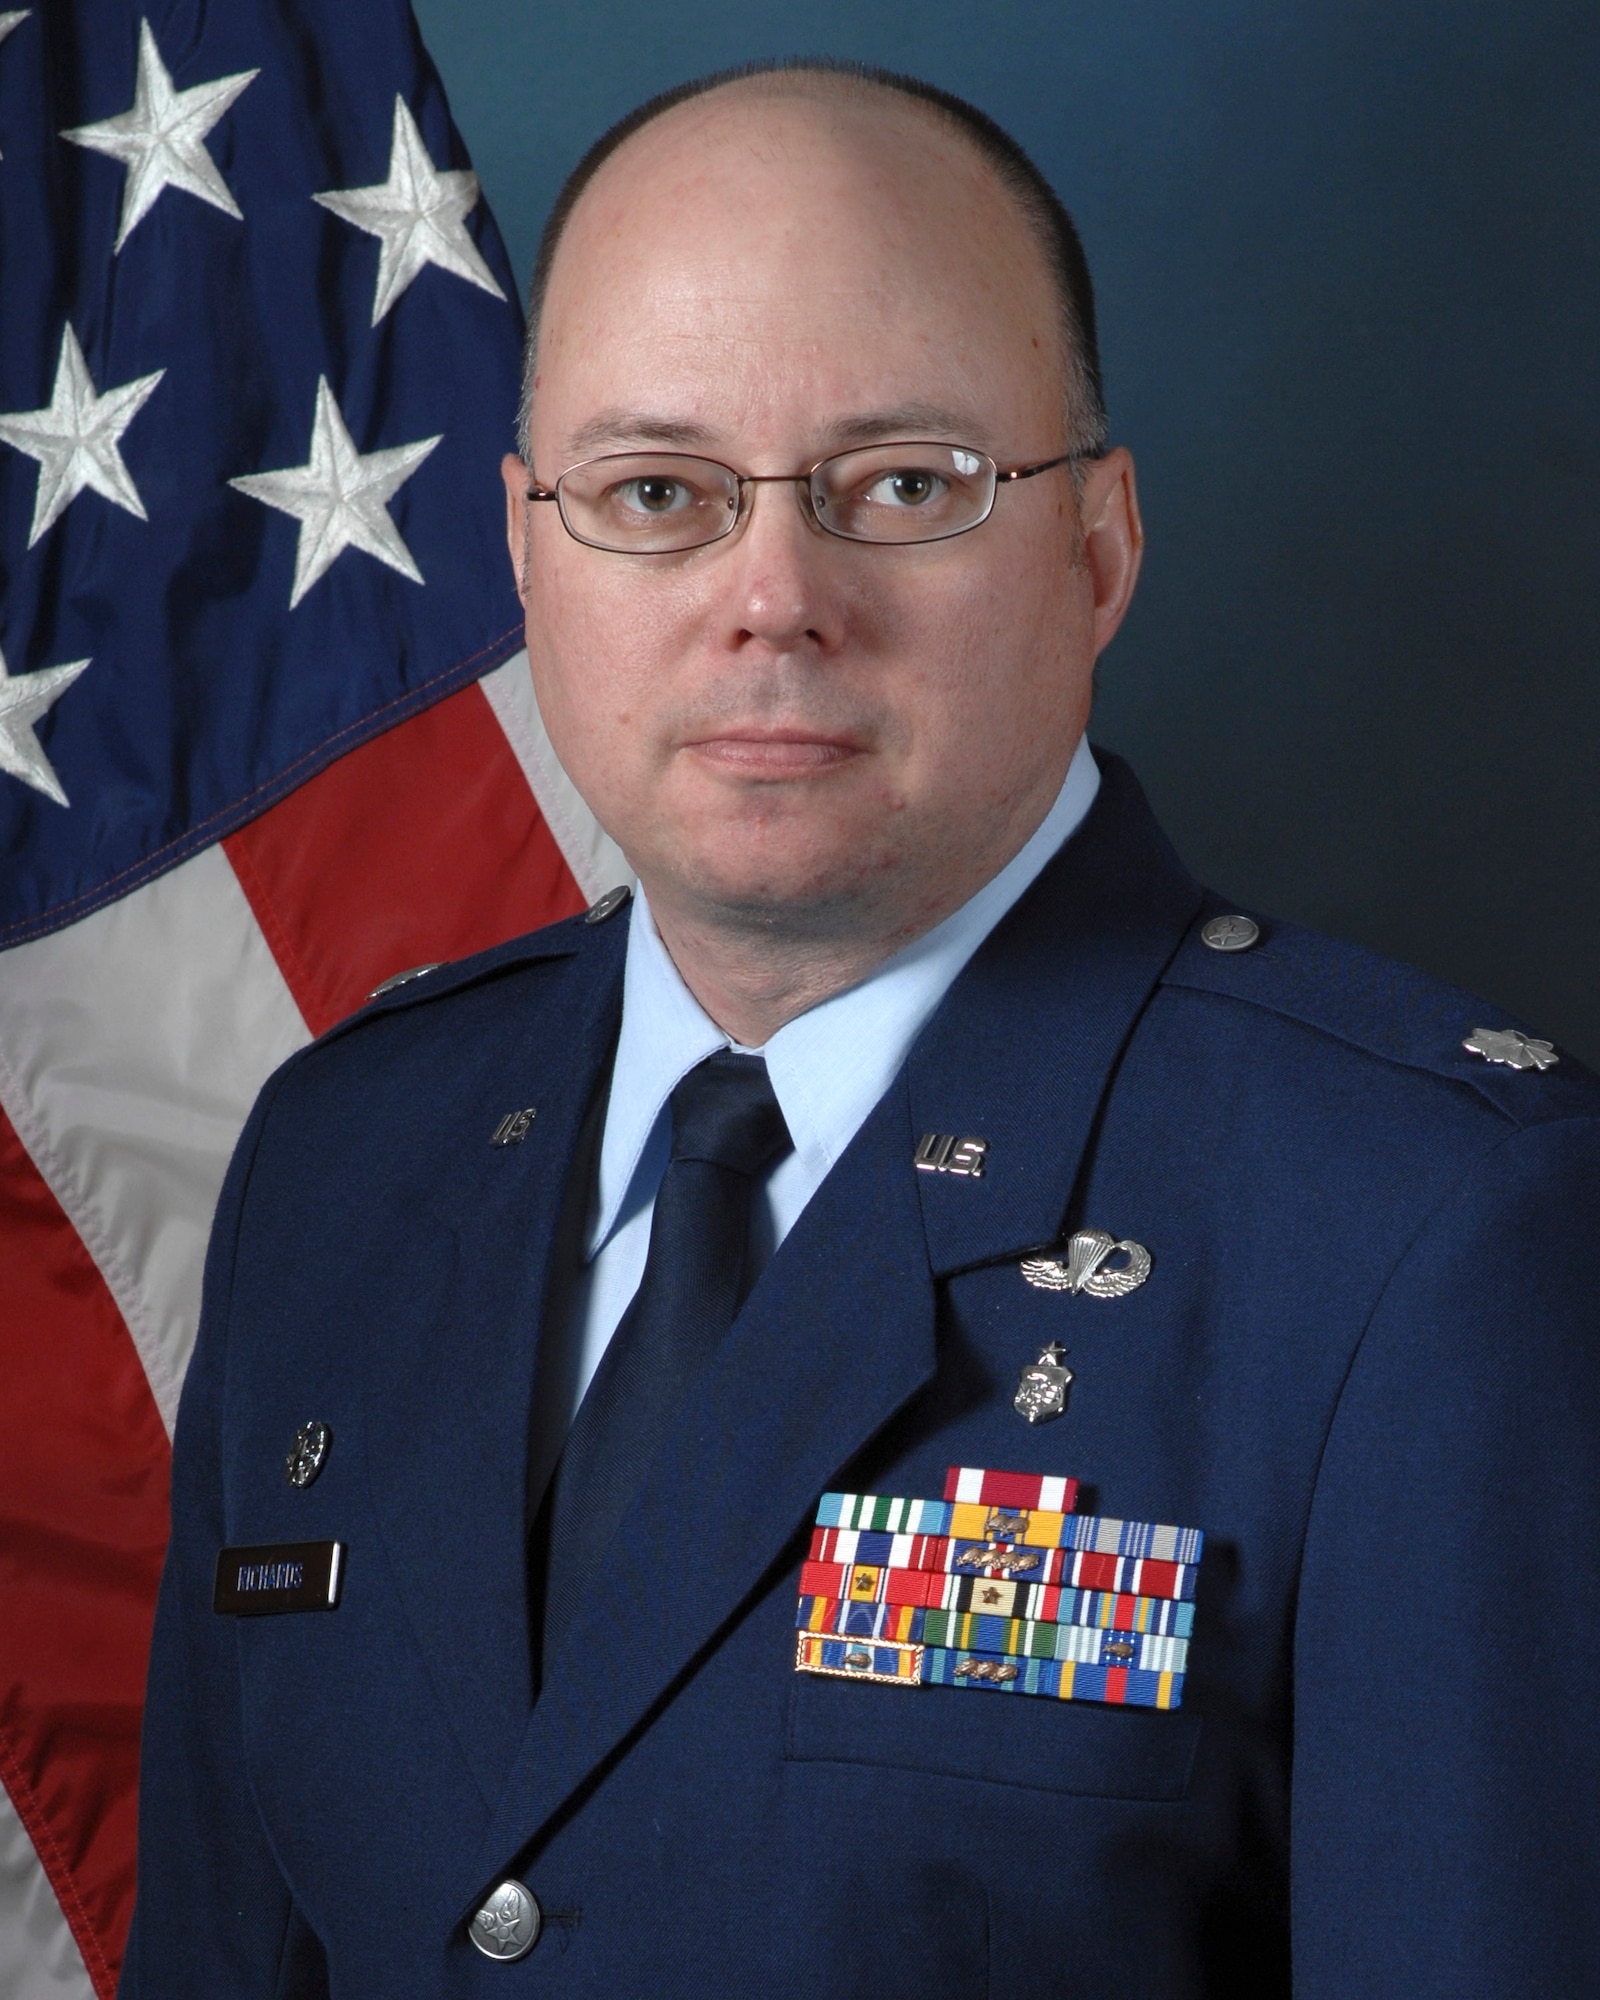 Lt. Col. Jonathan Richards, 39th Medical Support Squadron commander.